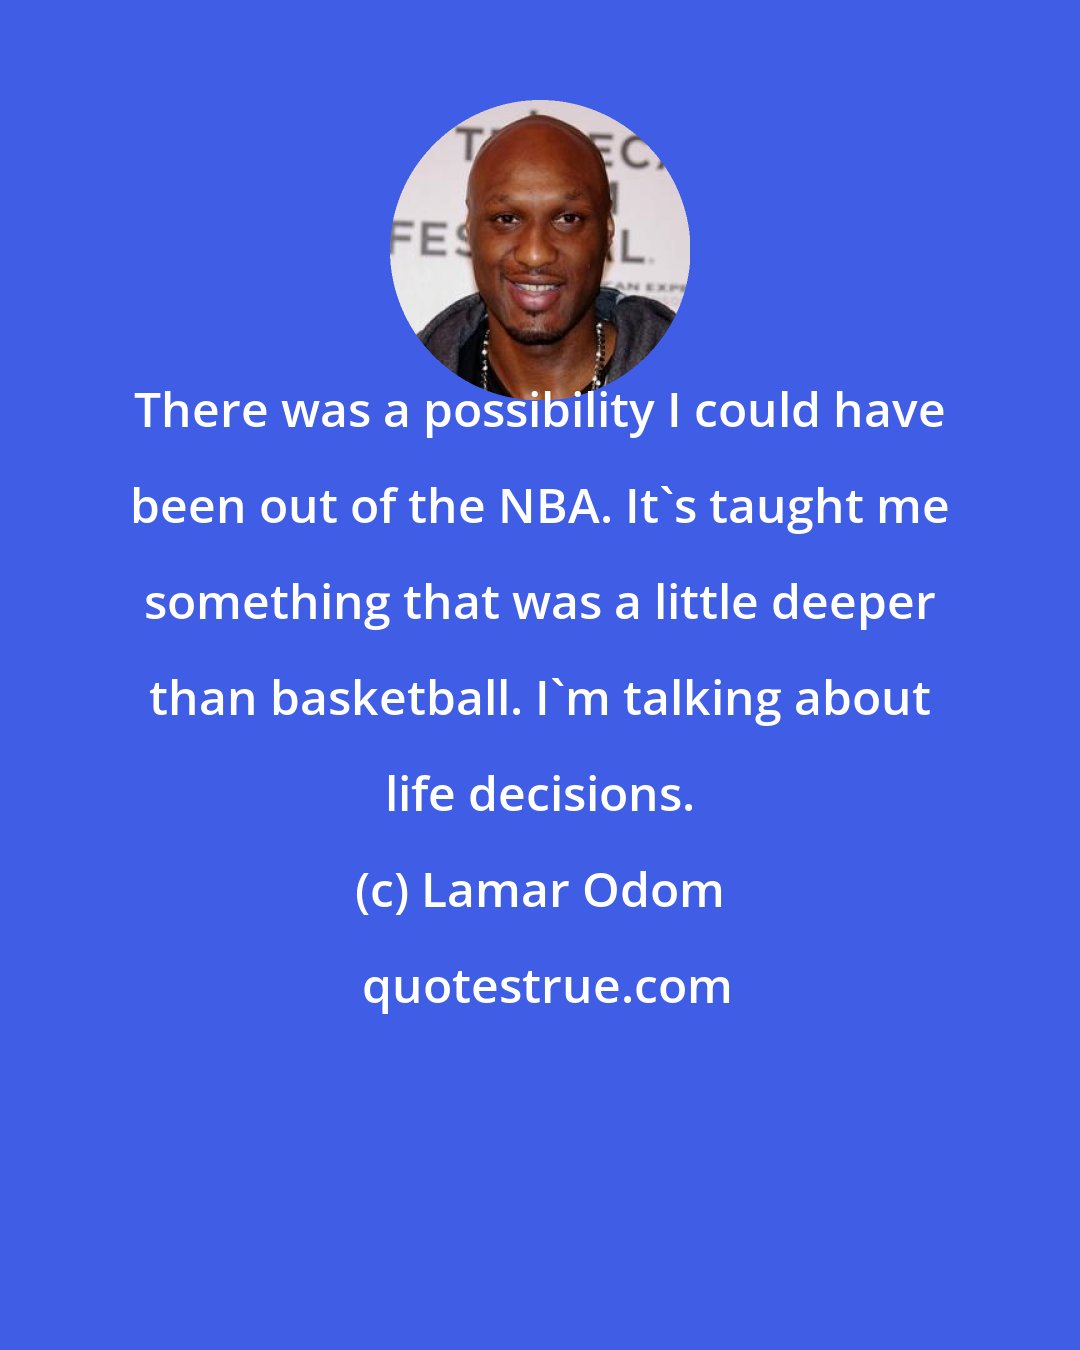 Lamar Odom: There was a possibility I could have been out of the NBA. It's taught me something that was a little deeper than basketball. I'm talking about life decisions.